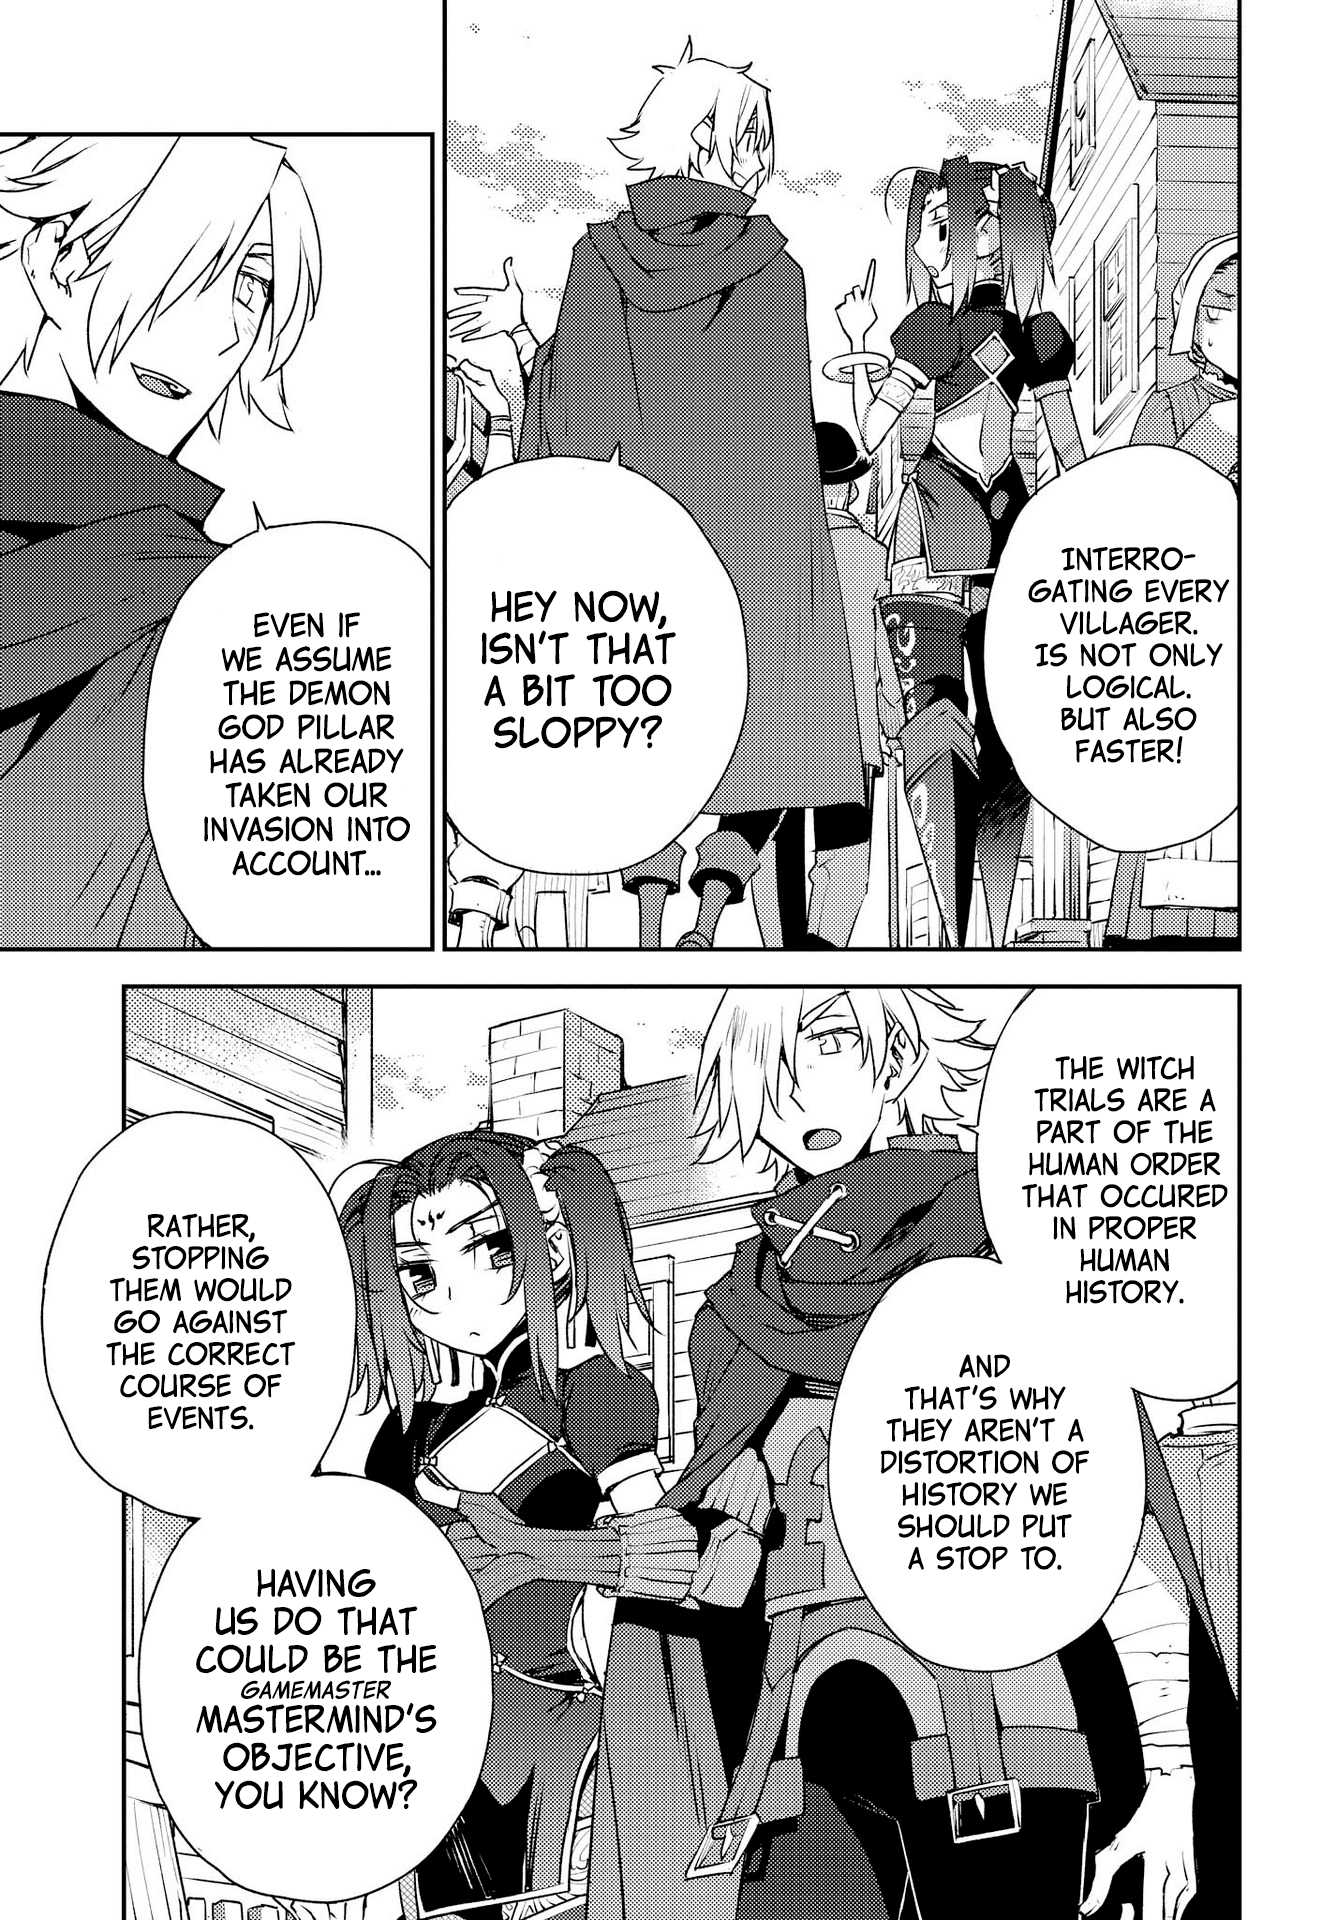 Fate/grand Order: Epic Of Remnant - Subspecies Singularity Iv: Taboo Advent Salem: Salem Of Heresy - Page 3